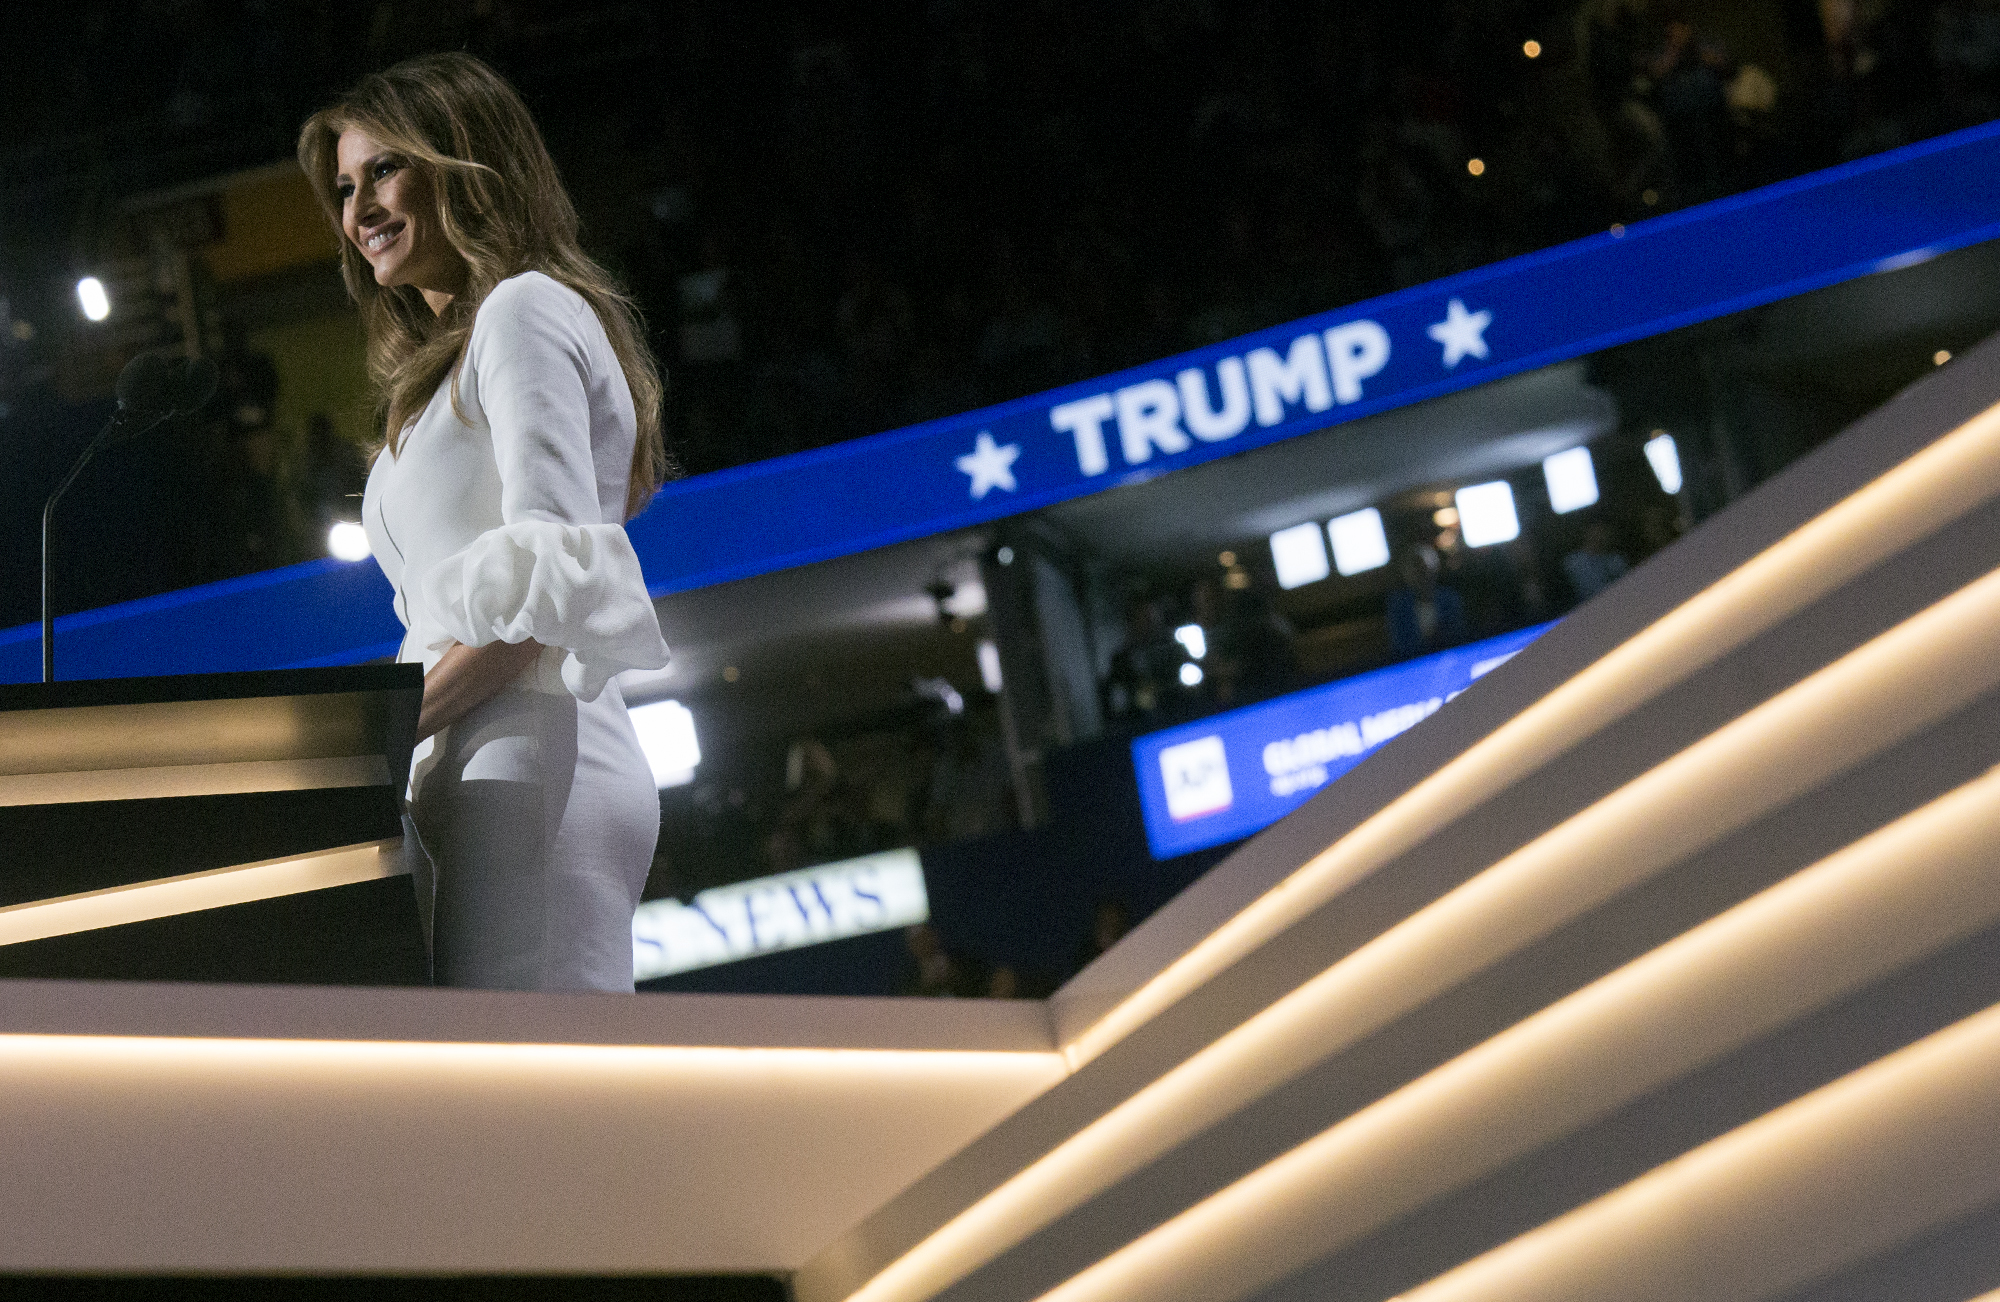 Melania Trump gives a speech at the Republican National Convention in Cleveland, Ohio, on July 18, 2016. (Brian van der Brug—LA Times/Getty Images)